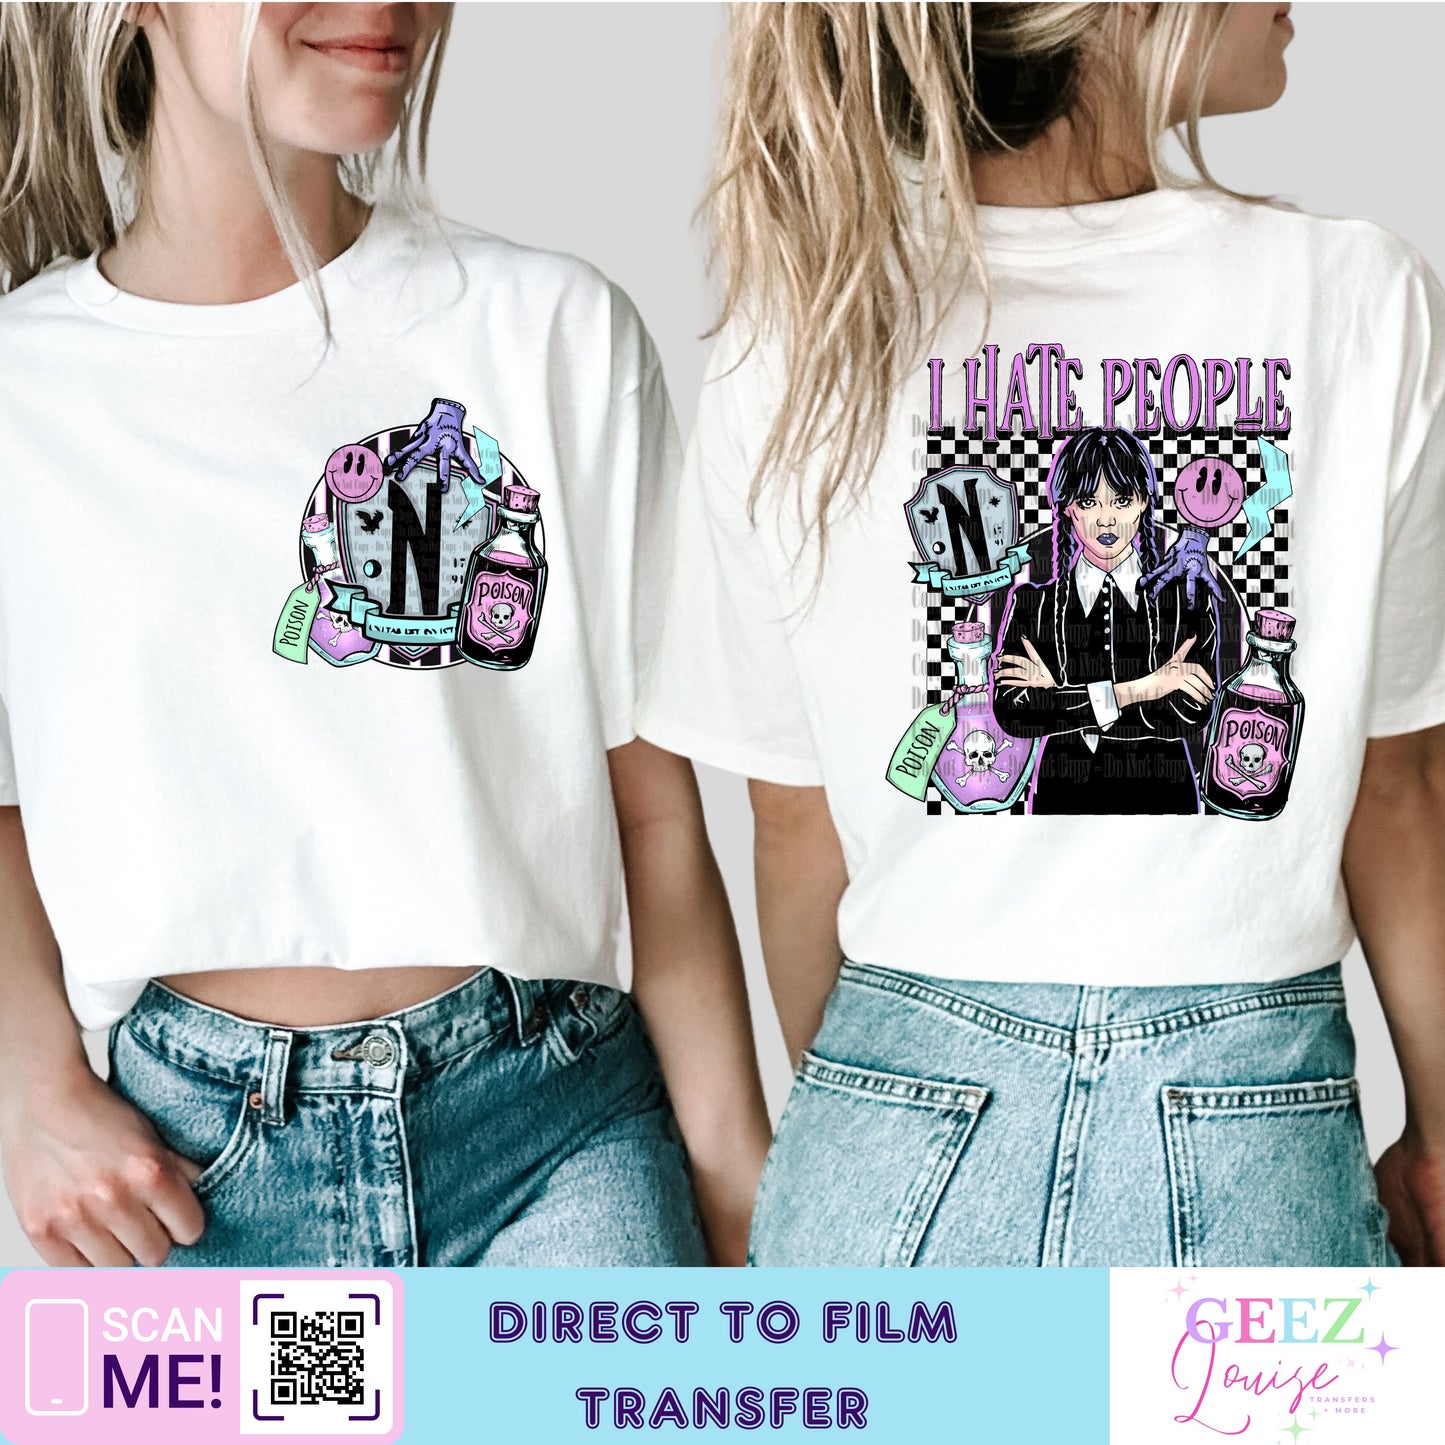 Hate people  - Direct to Film Transfer - made to order